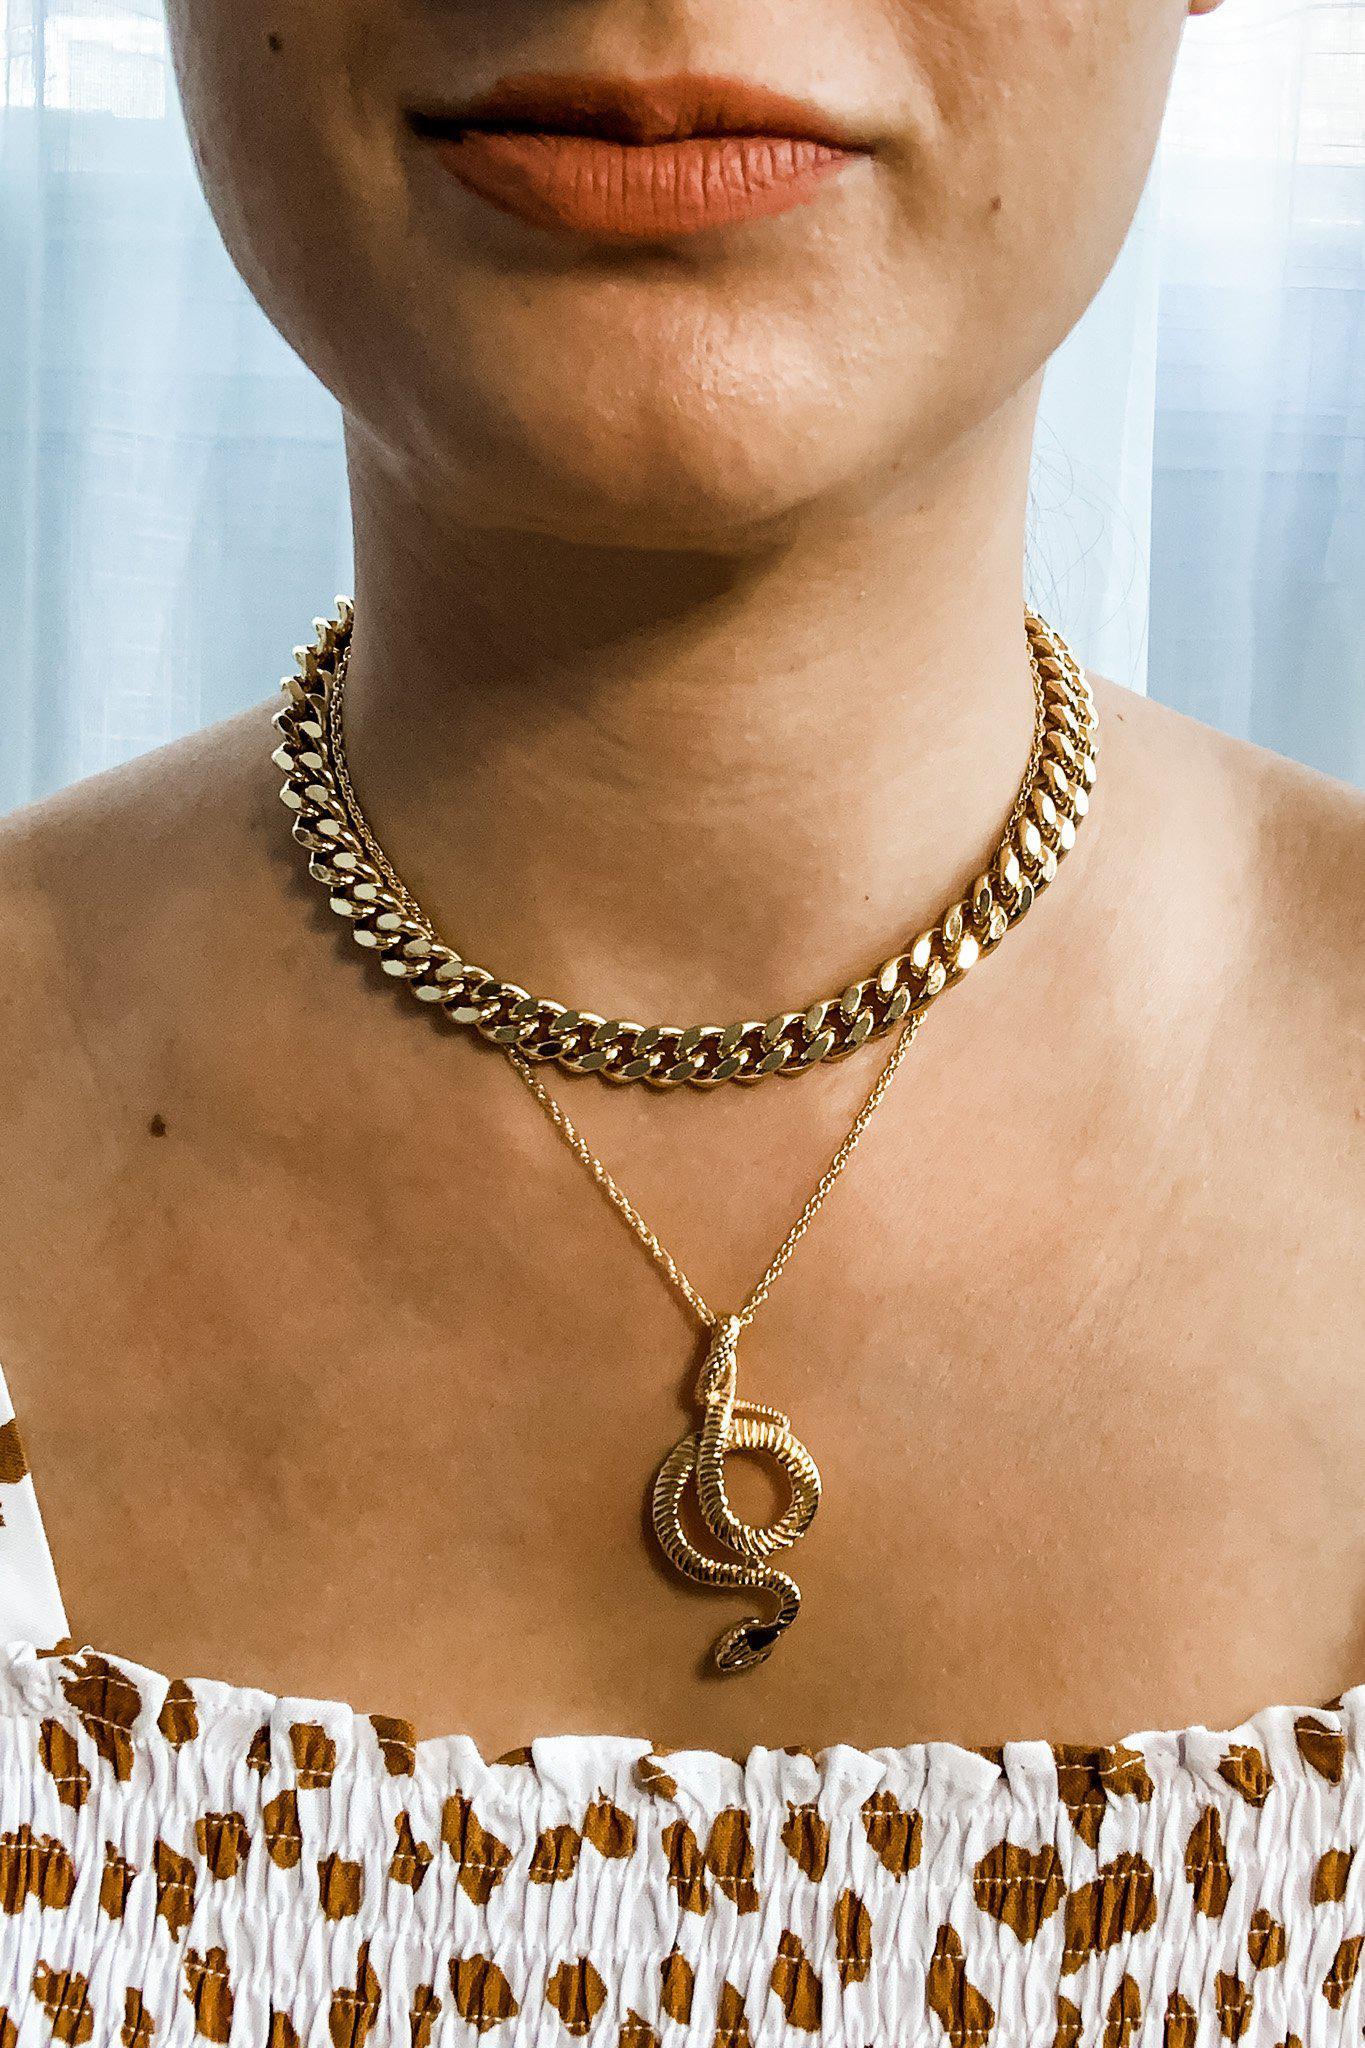 Snake Charmer necklace layered with Giselle chain necklace on model